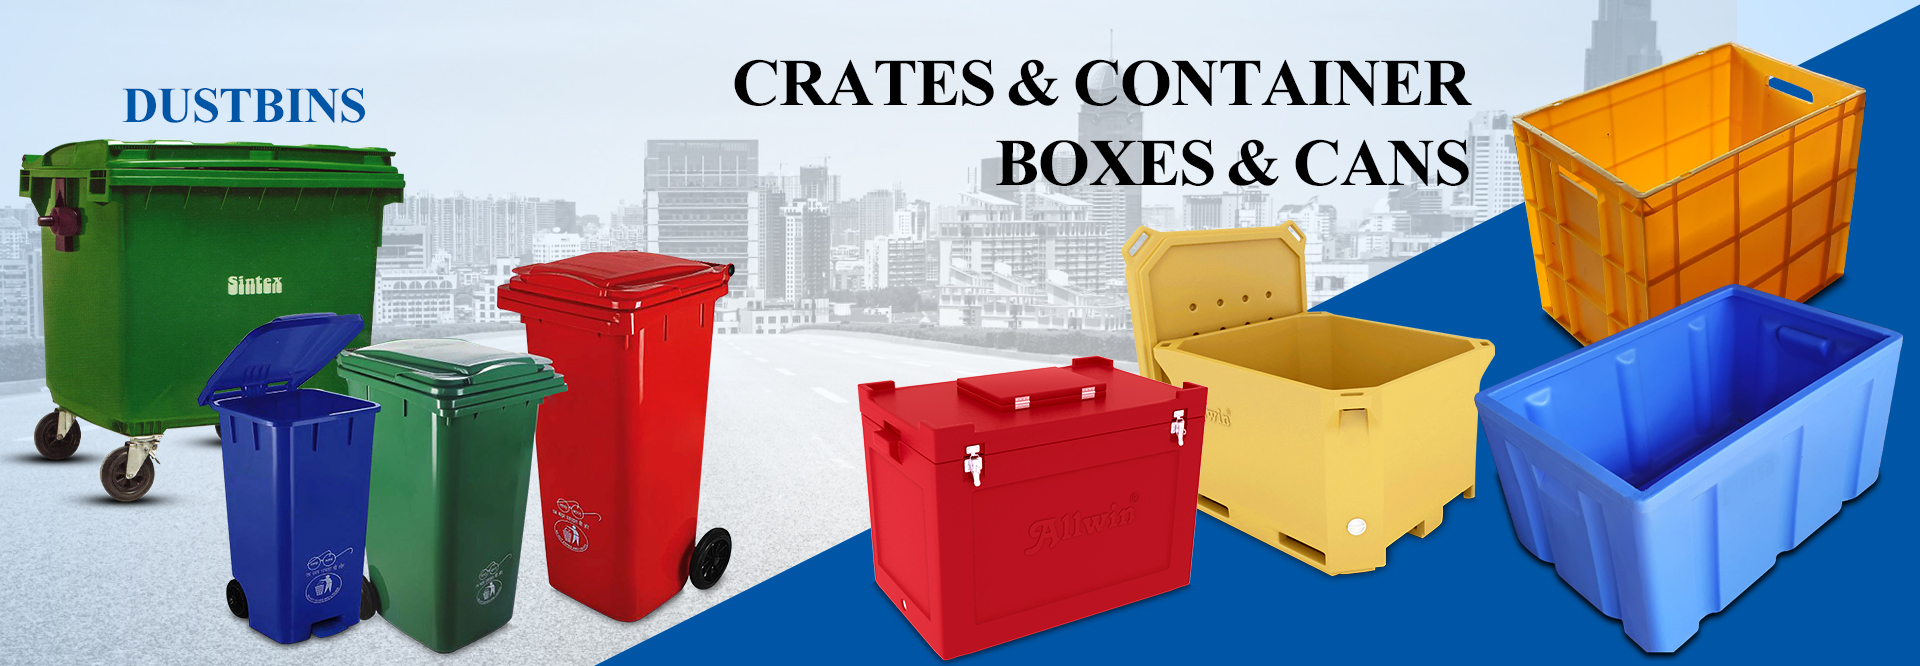 Sriwari Textiles Industrial Crates, Containers, Cans, Fish Boxes, Storage Tanks